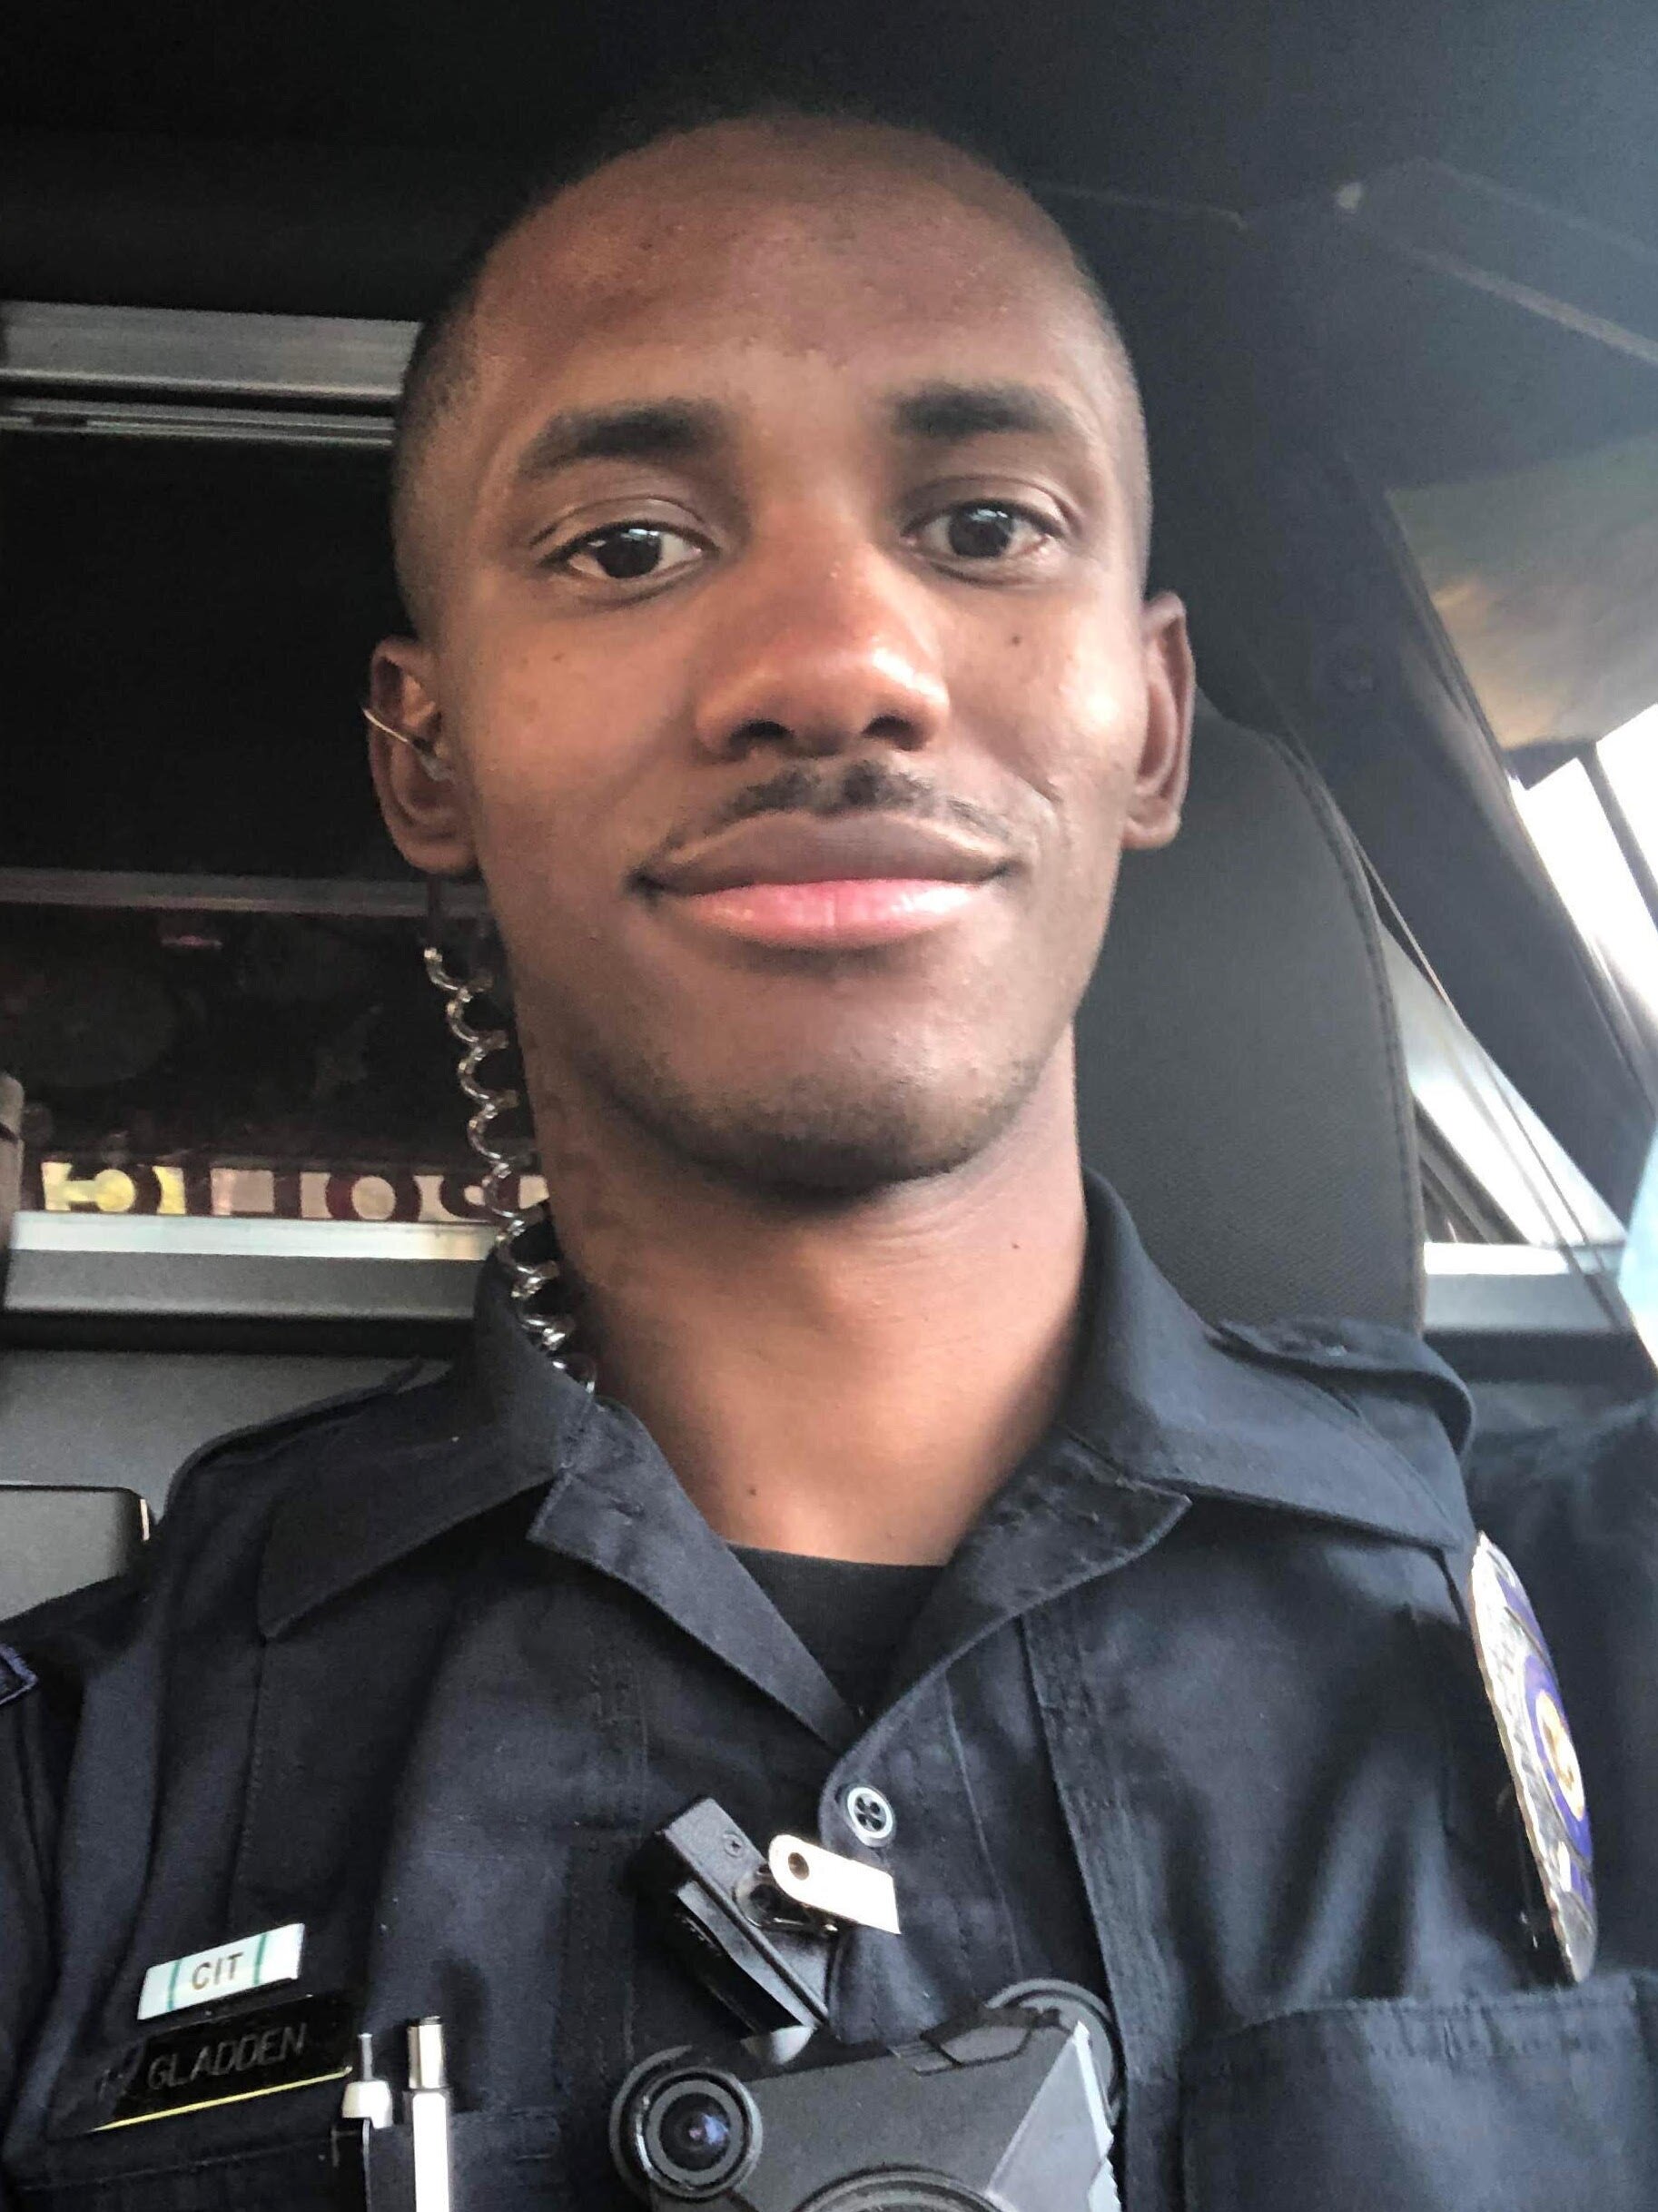 “In 2017, I hit the street,” says Officer Gladden. Gladden loved it. Working third shift, he wasn’t sleeping much but he was living his dream. Despite the paperwork and some emotionally tough calls, he found it incredibly rewarding to help people in crisis. His father was always very committed to service and doing what he could for others. With CMPD, Officer Gladden enjoys being able to help kids who, like himself, grew up in poverty but lack the support he received from his parents and five siblings. He says he has always wanted to help young people, because they can change. - 